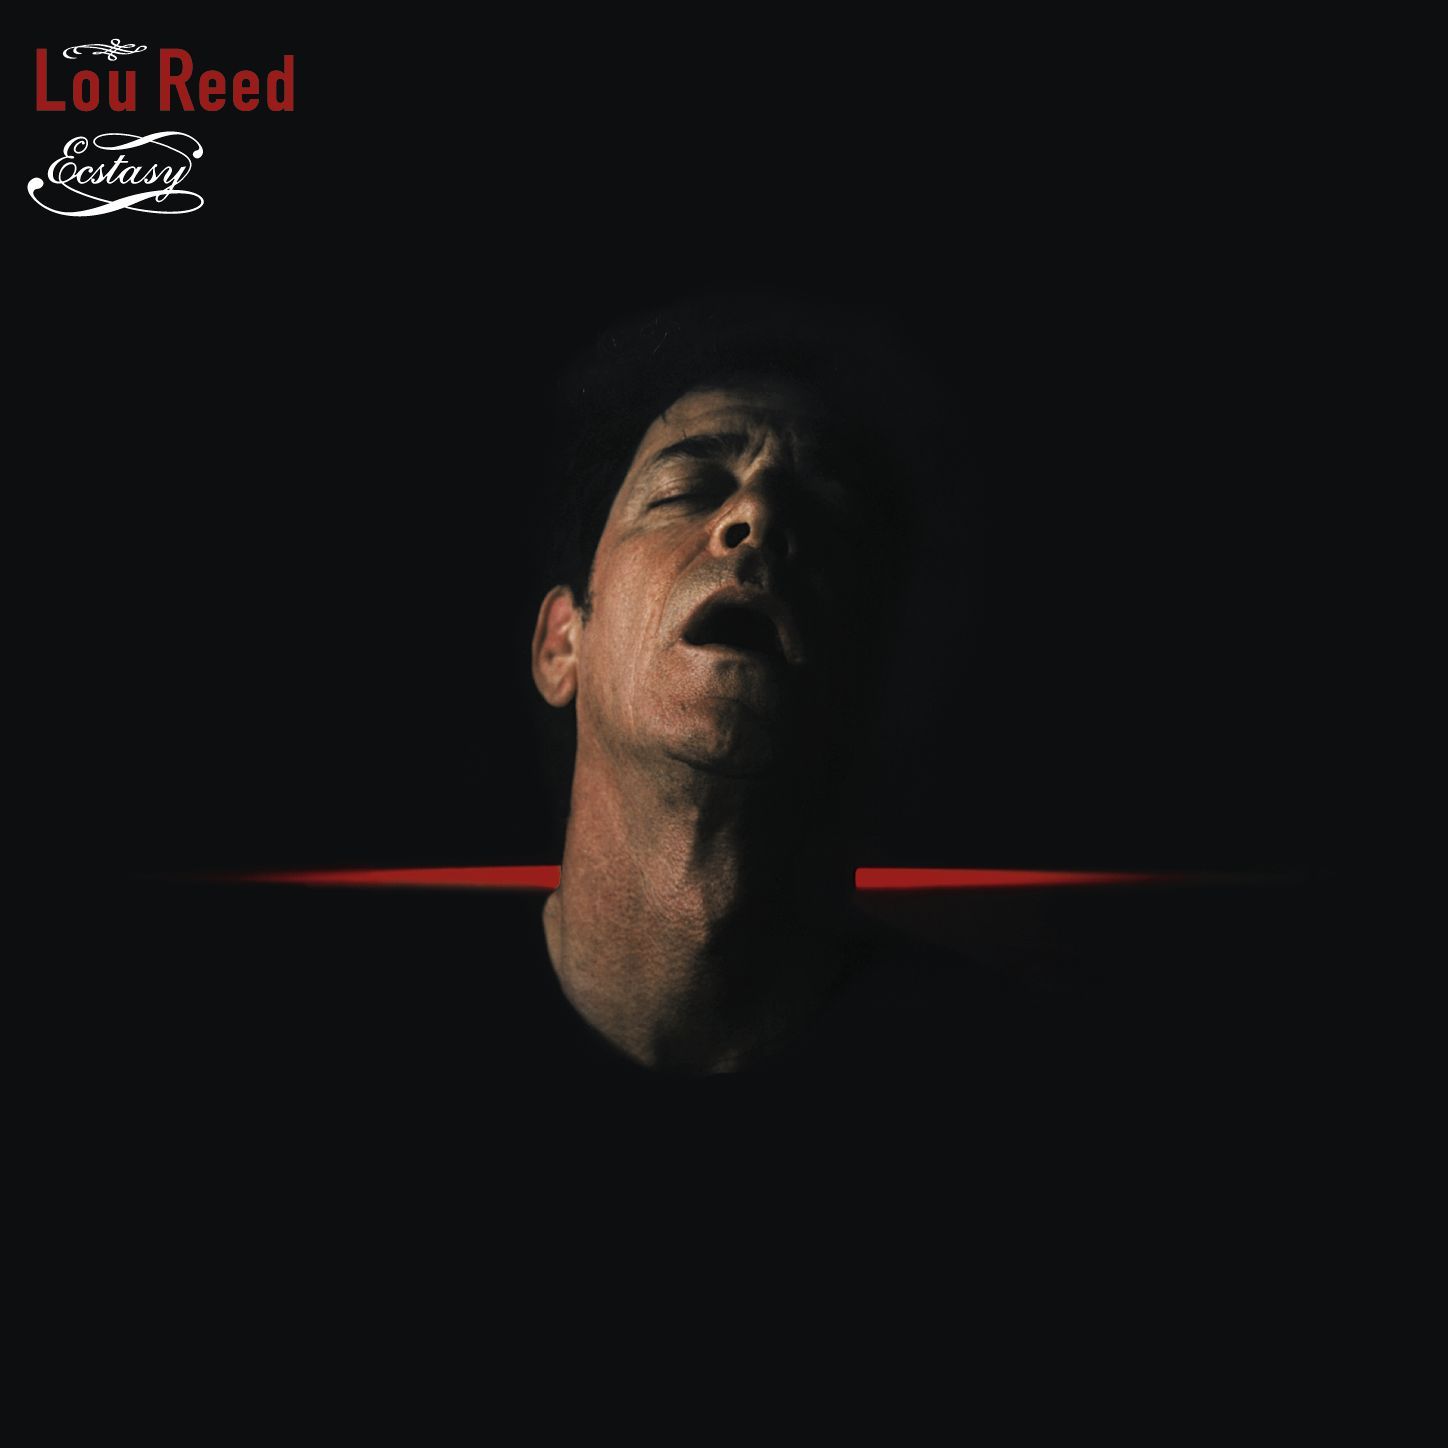 Ecstasy (Lou Reed – Artist Of The Year Part 22)